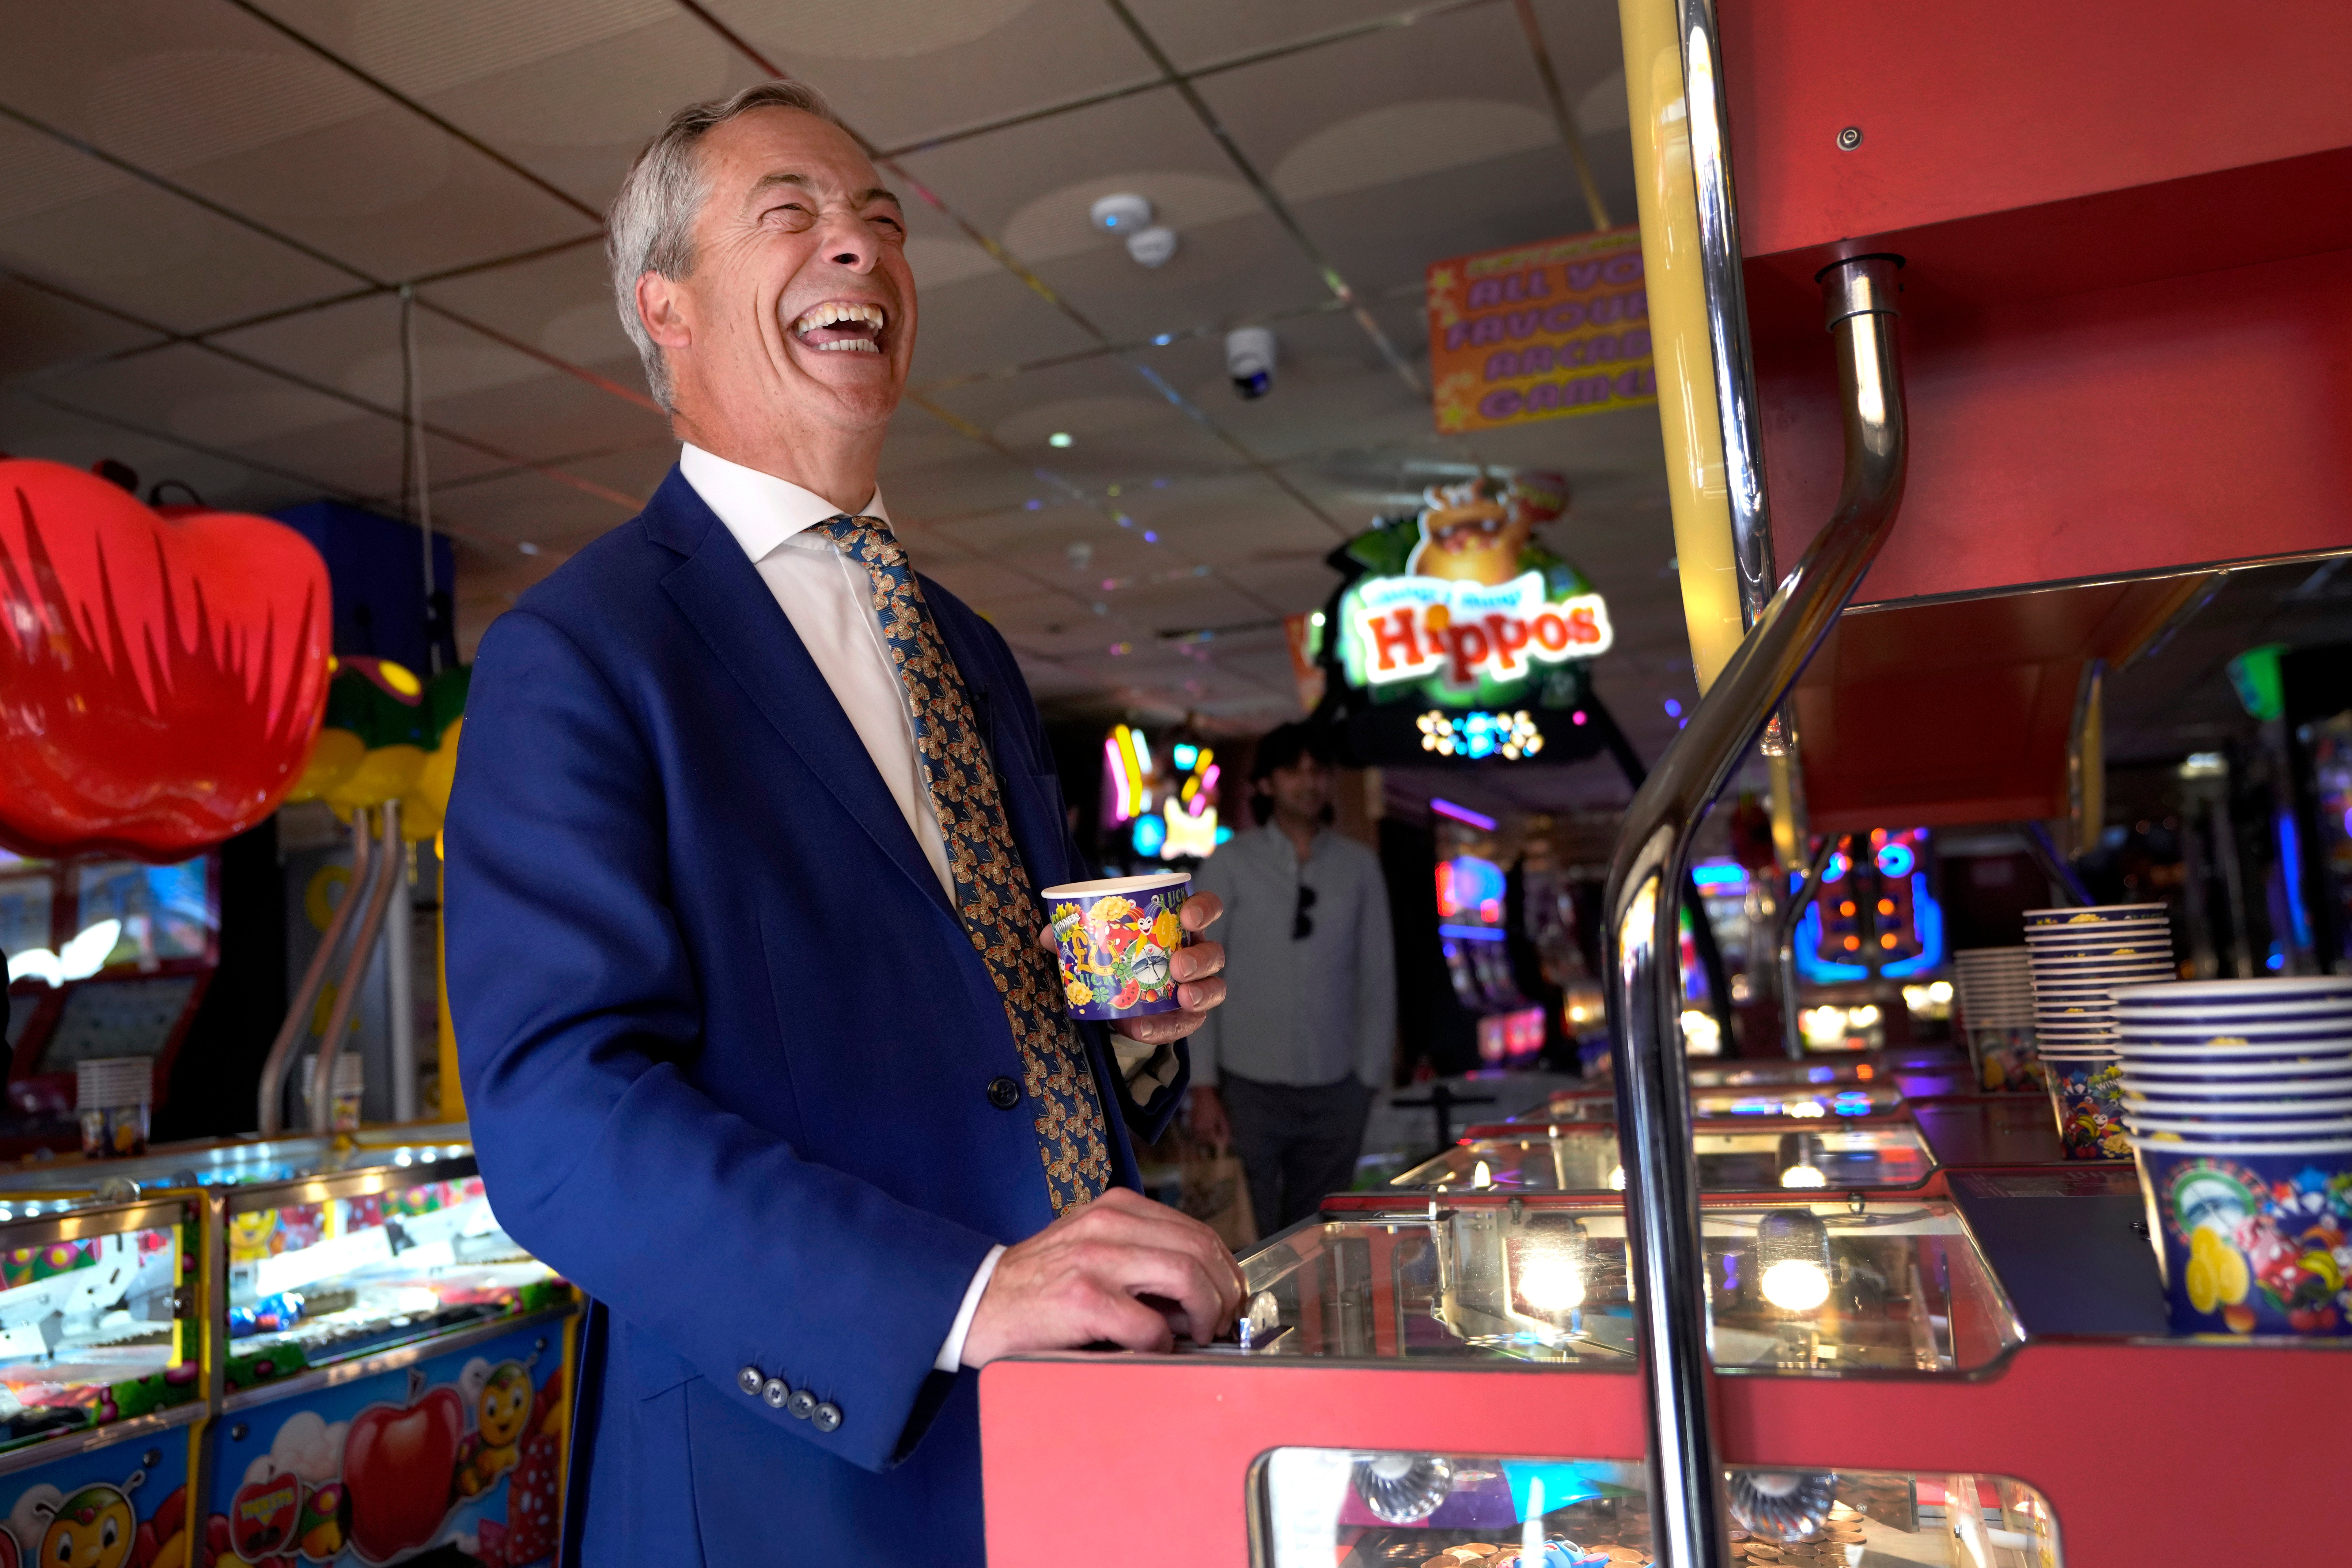 clacton, conspiracy theories, nigel farage, general election, tory, alastair campbell, bad actors or conspiracy theories - the inside story of farage’s battle for clacton